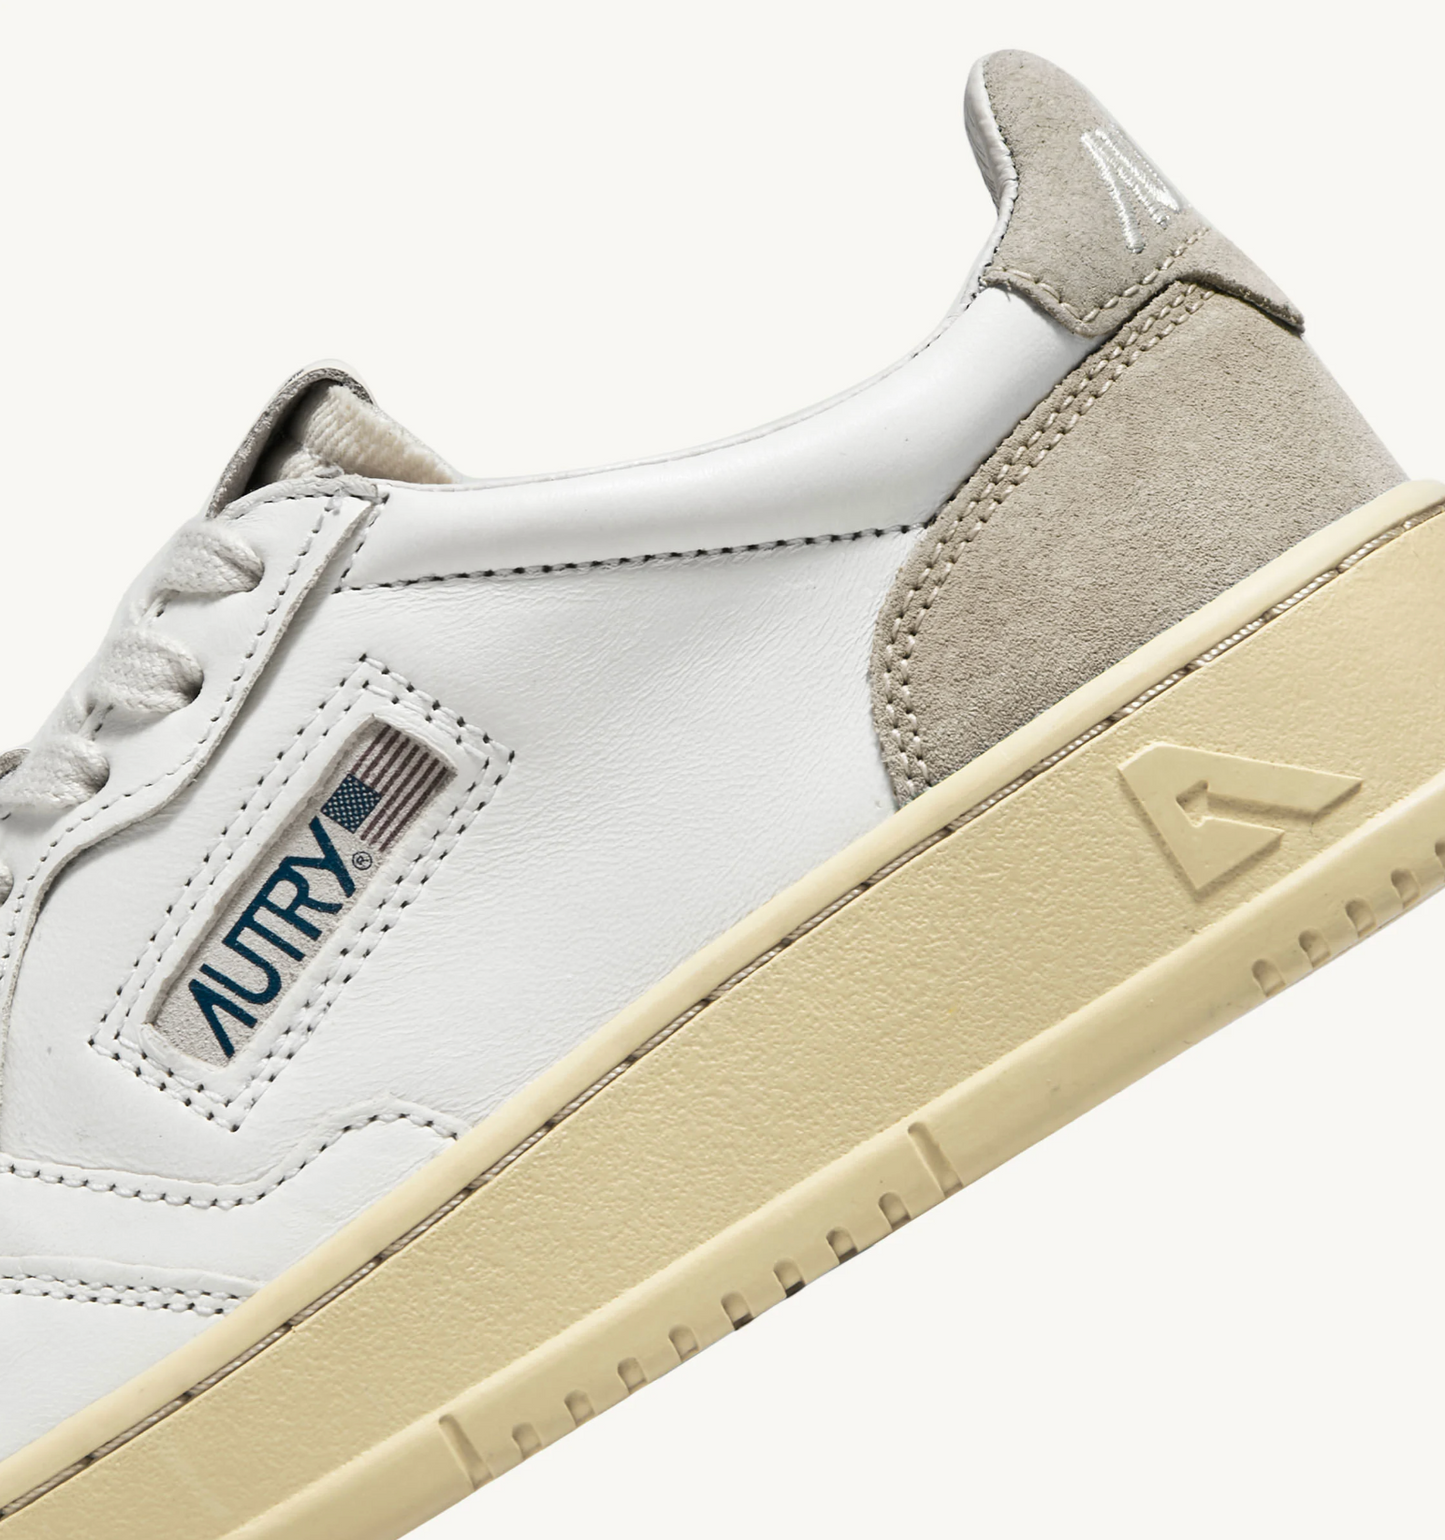 MEDALIST LOW SL01 SUEDE/LEATHER/WHITE/ SAND